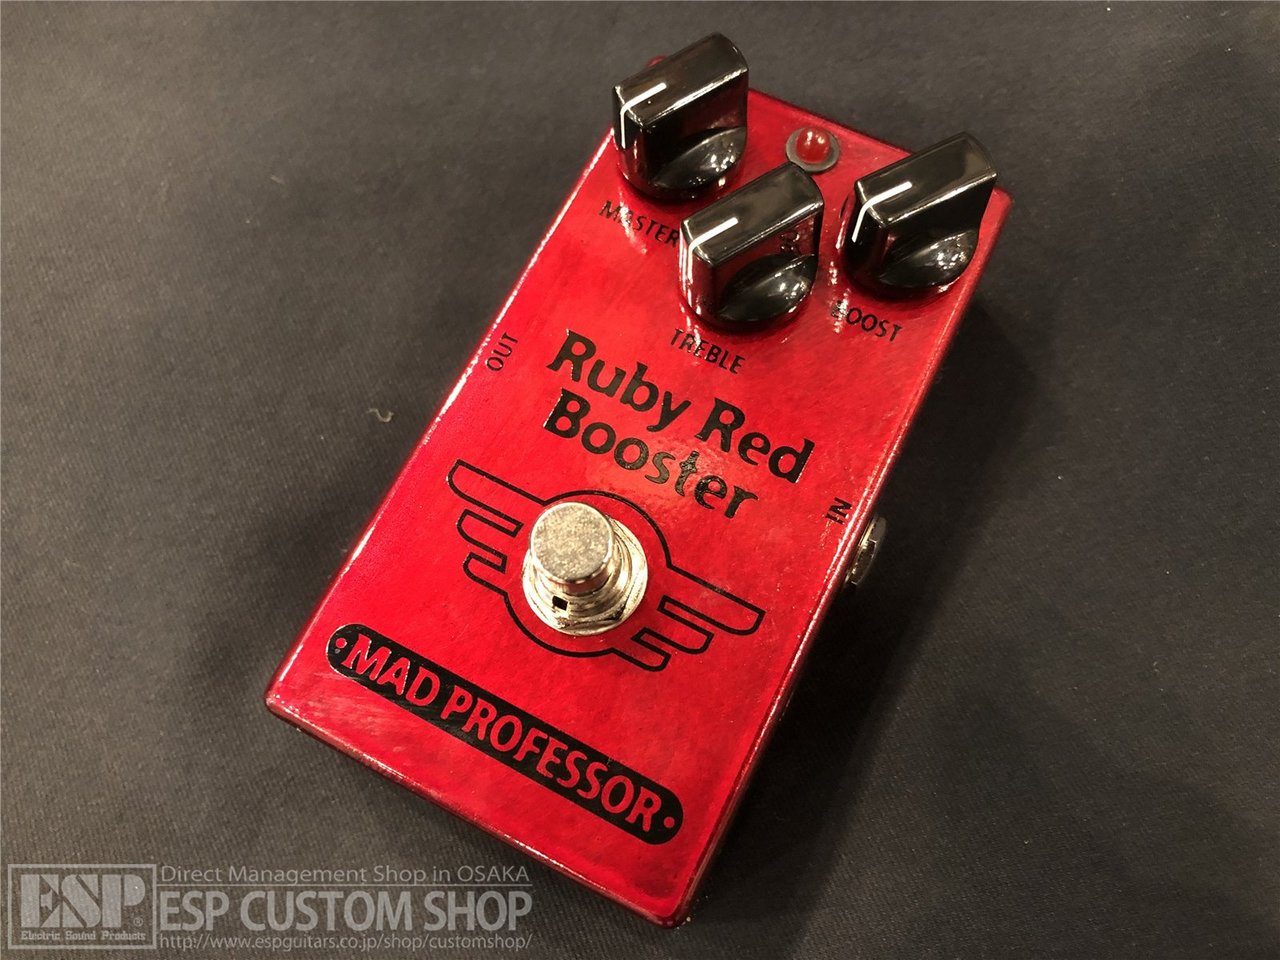 MAD PROFESSOR Ruby Red Booster トレブルブースター